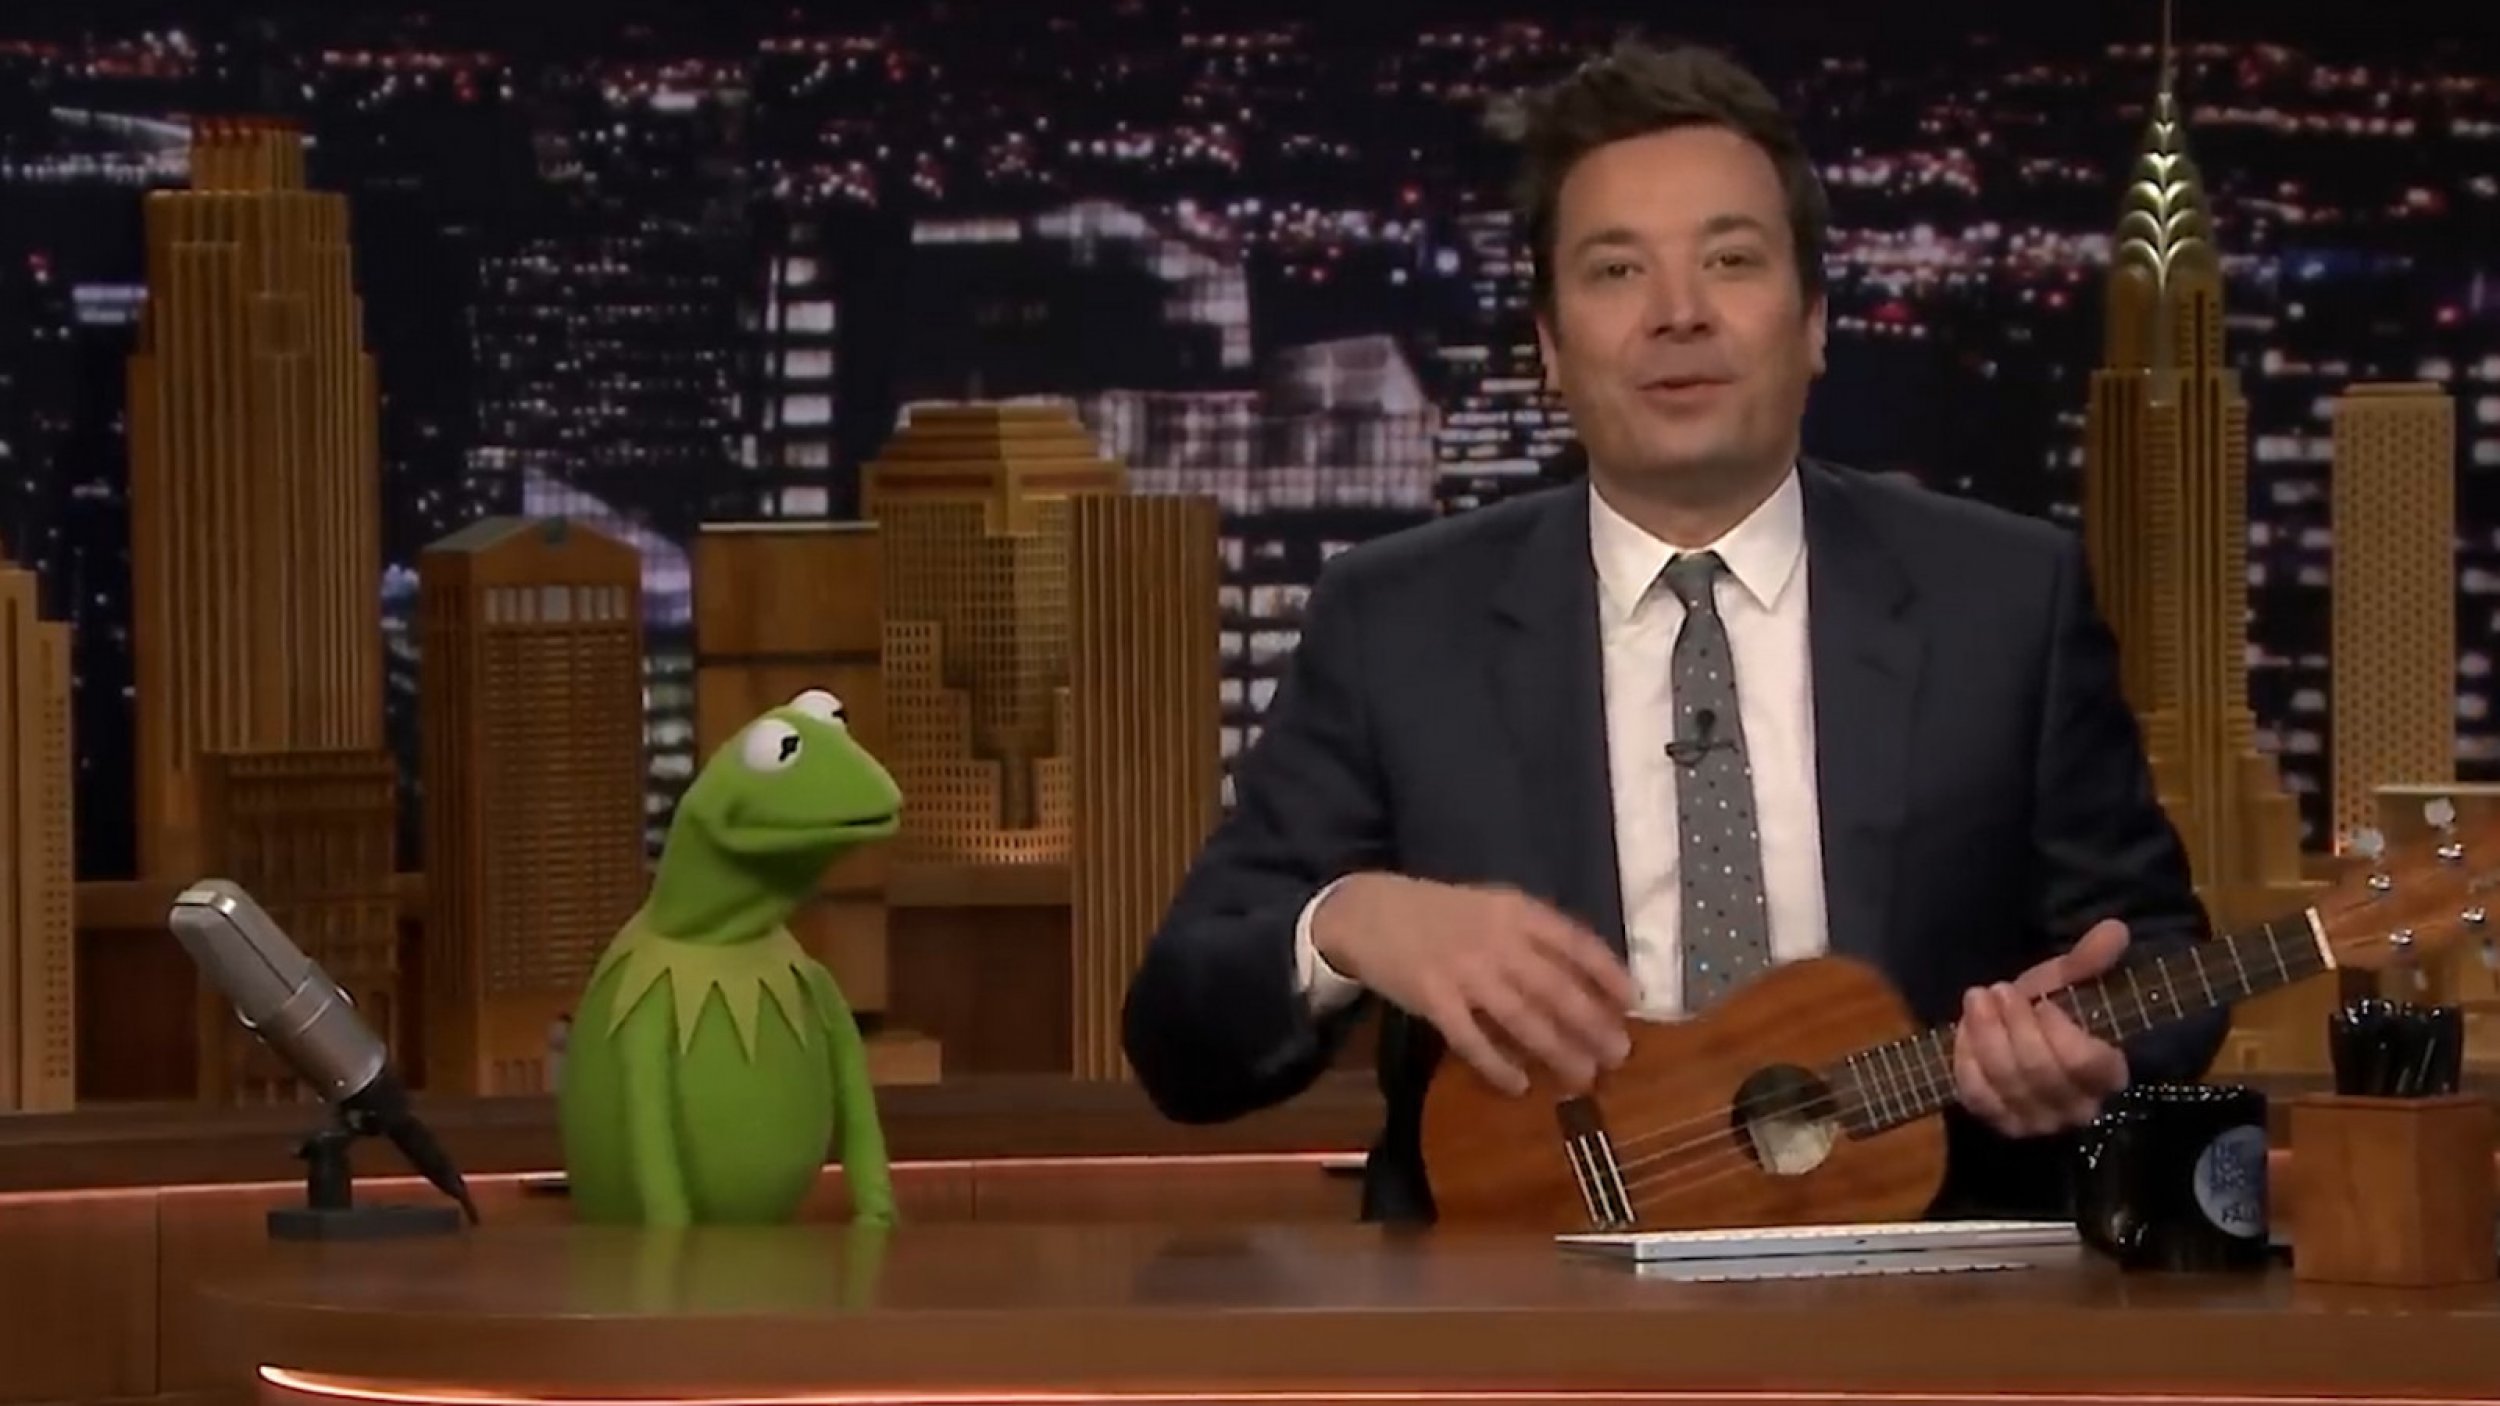 Jimmy and Kermit Announce Doodle For Google Competition